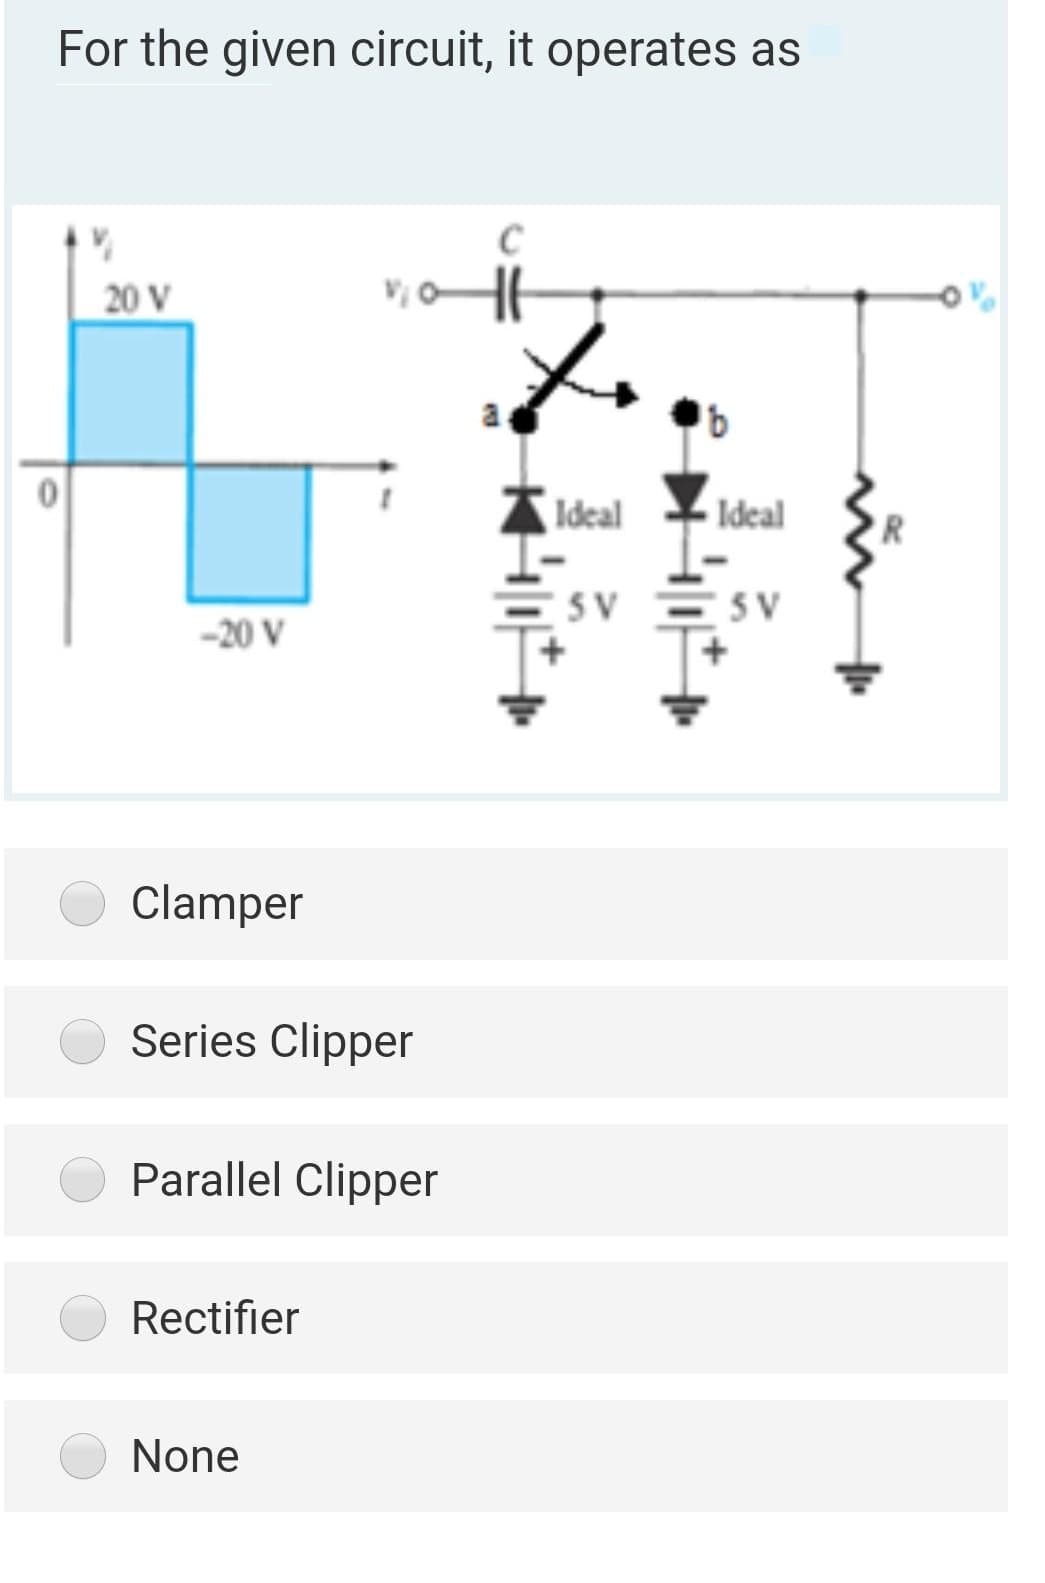 For the given circuit, it operates as
C
20 V
Ideal
Ideal
SV ESV
-20 V
Clamper
Series Clipper
Parallel Clipper
Rectifier
None
